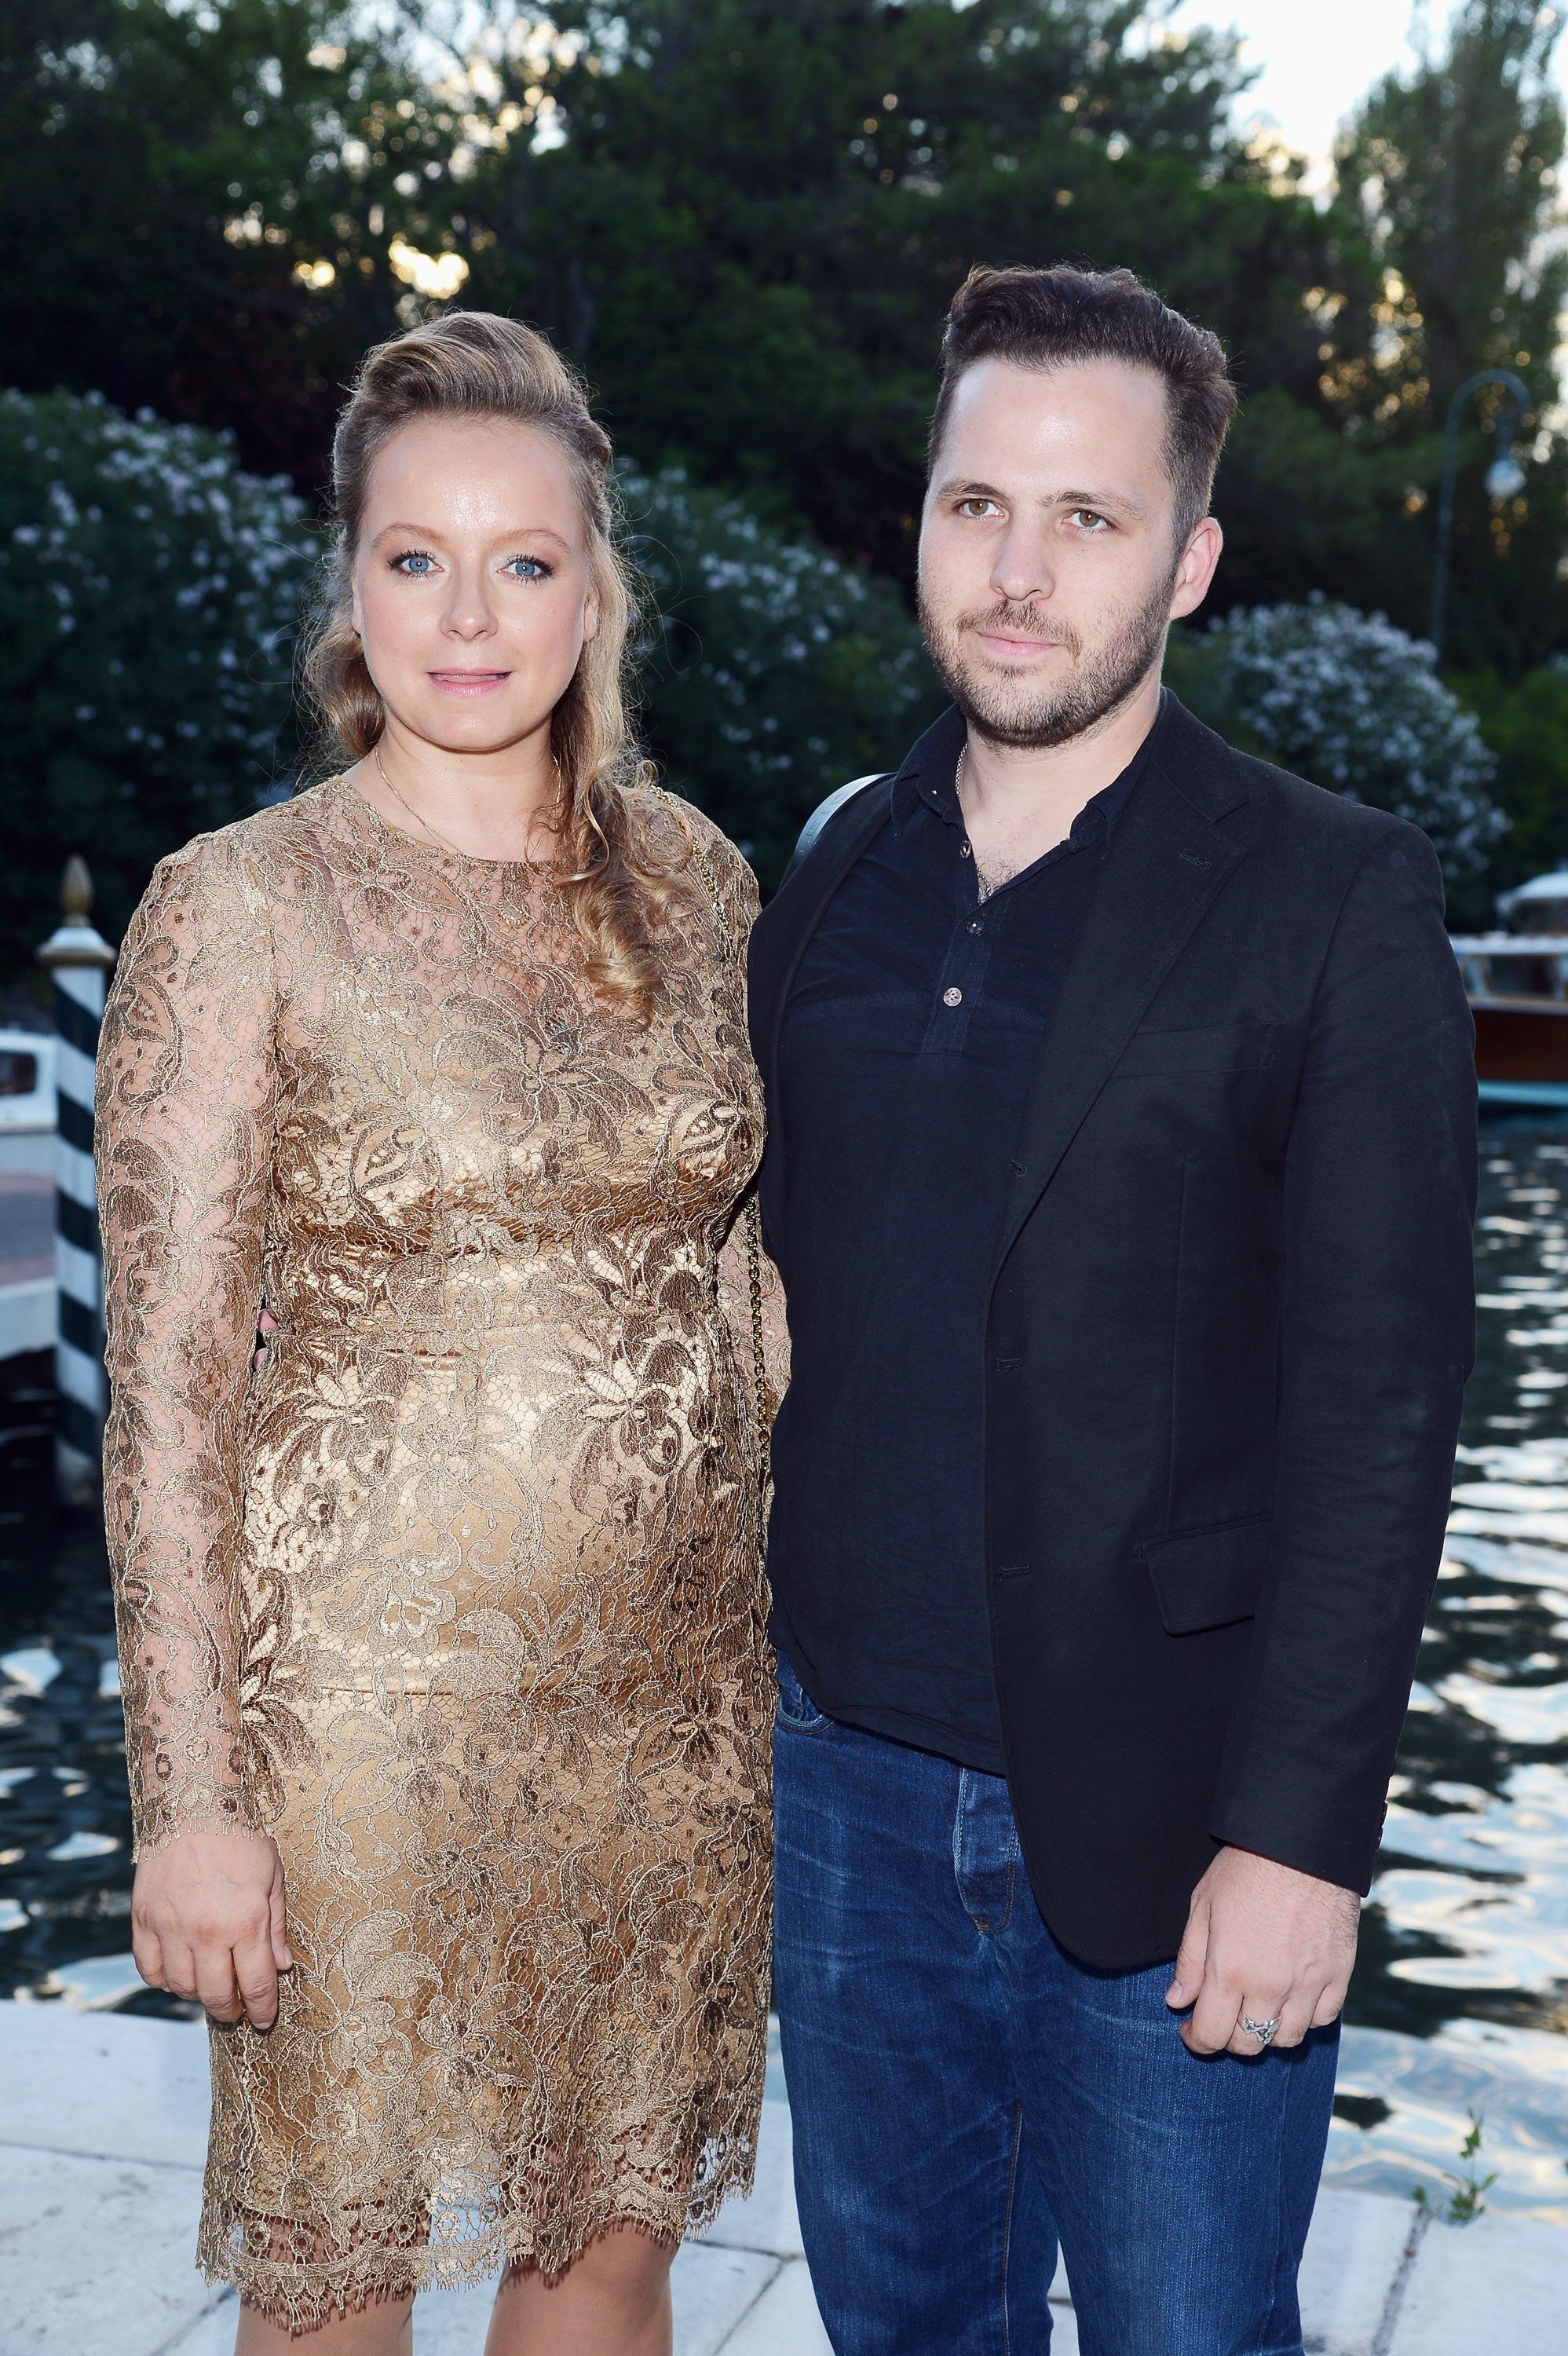 Samantha Morton and Harry Holm at the 69th Venice International Film Festival on August 28, 2012 | Source: Getty Images